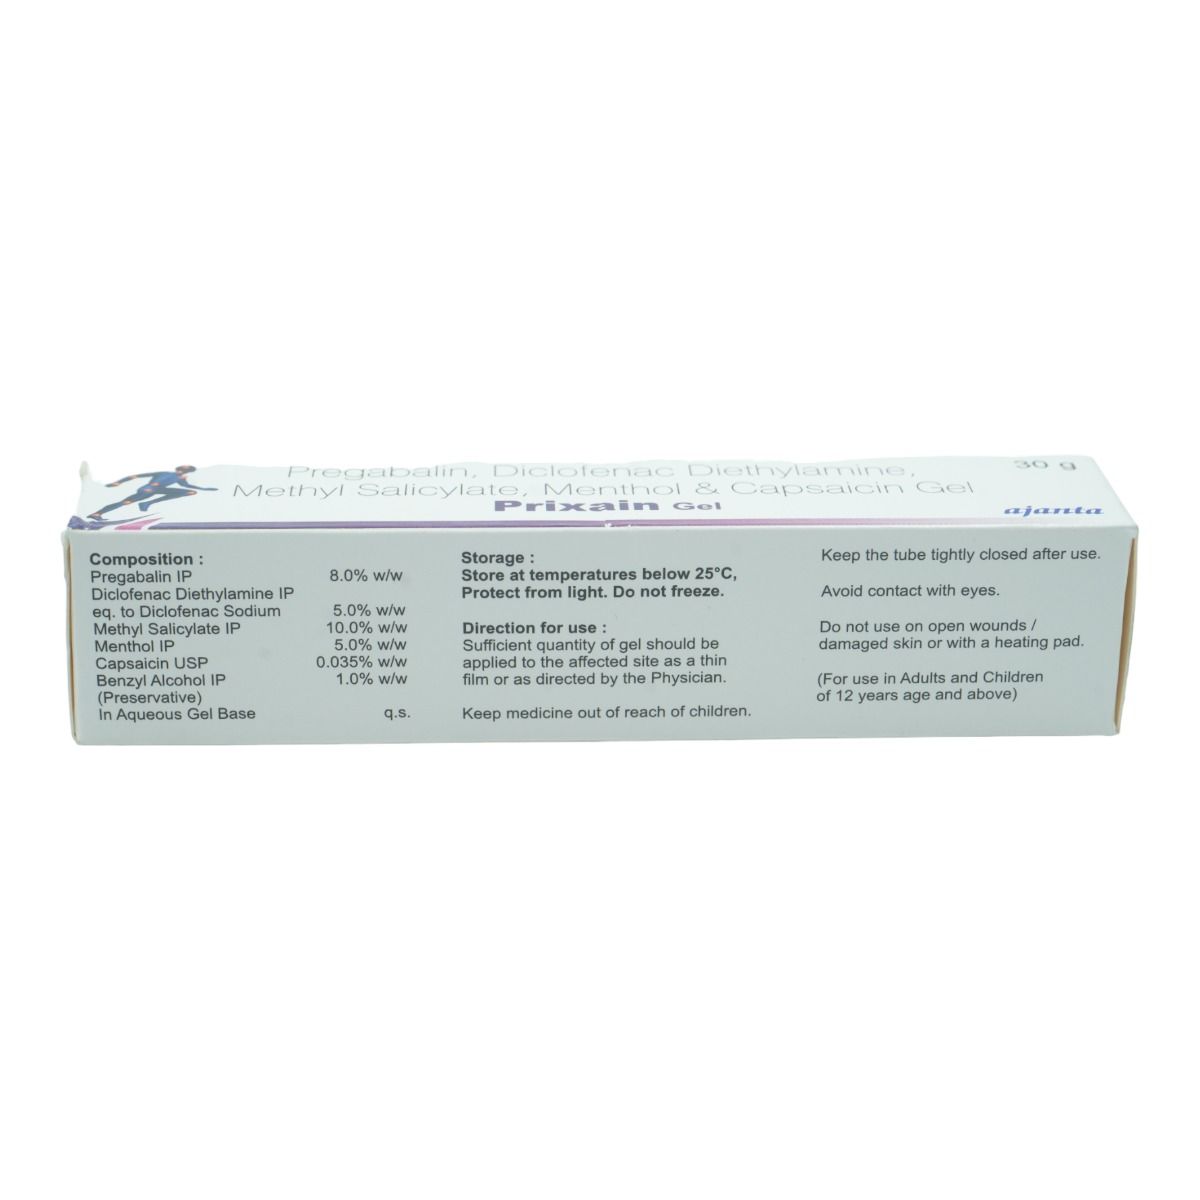 Prixain Gel 30 gm Price, Uses, Side Effects, Composition Apollo Pharmacy